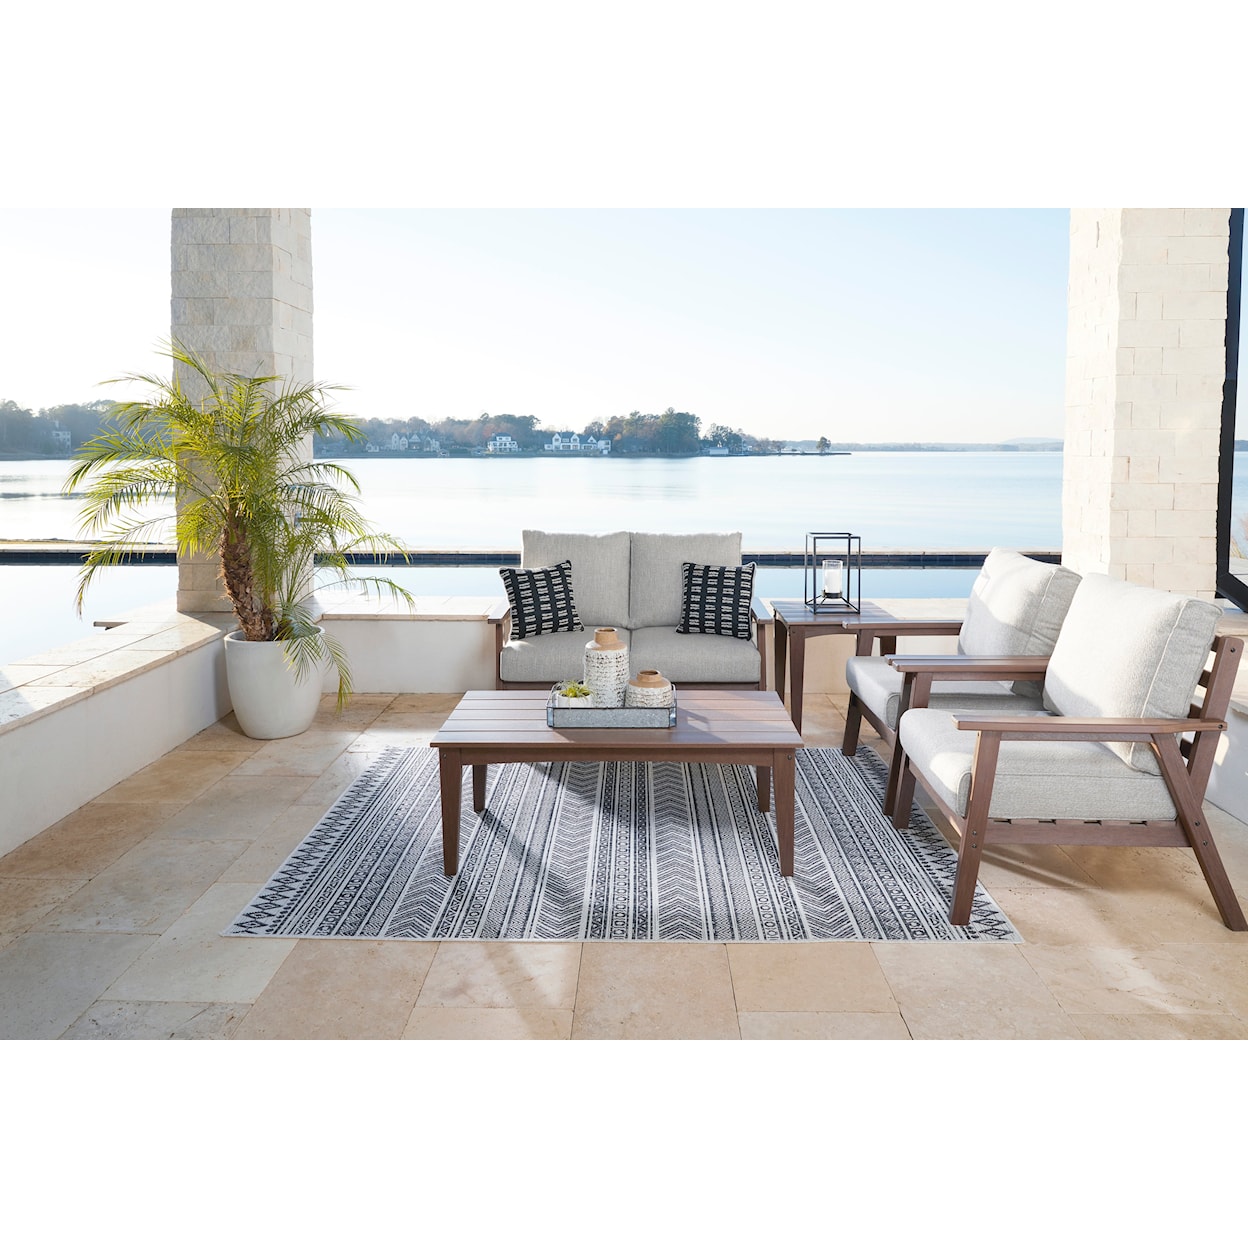 Signature Design by Ashley Emmeline Outdoor Lounge Chair with Cushion